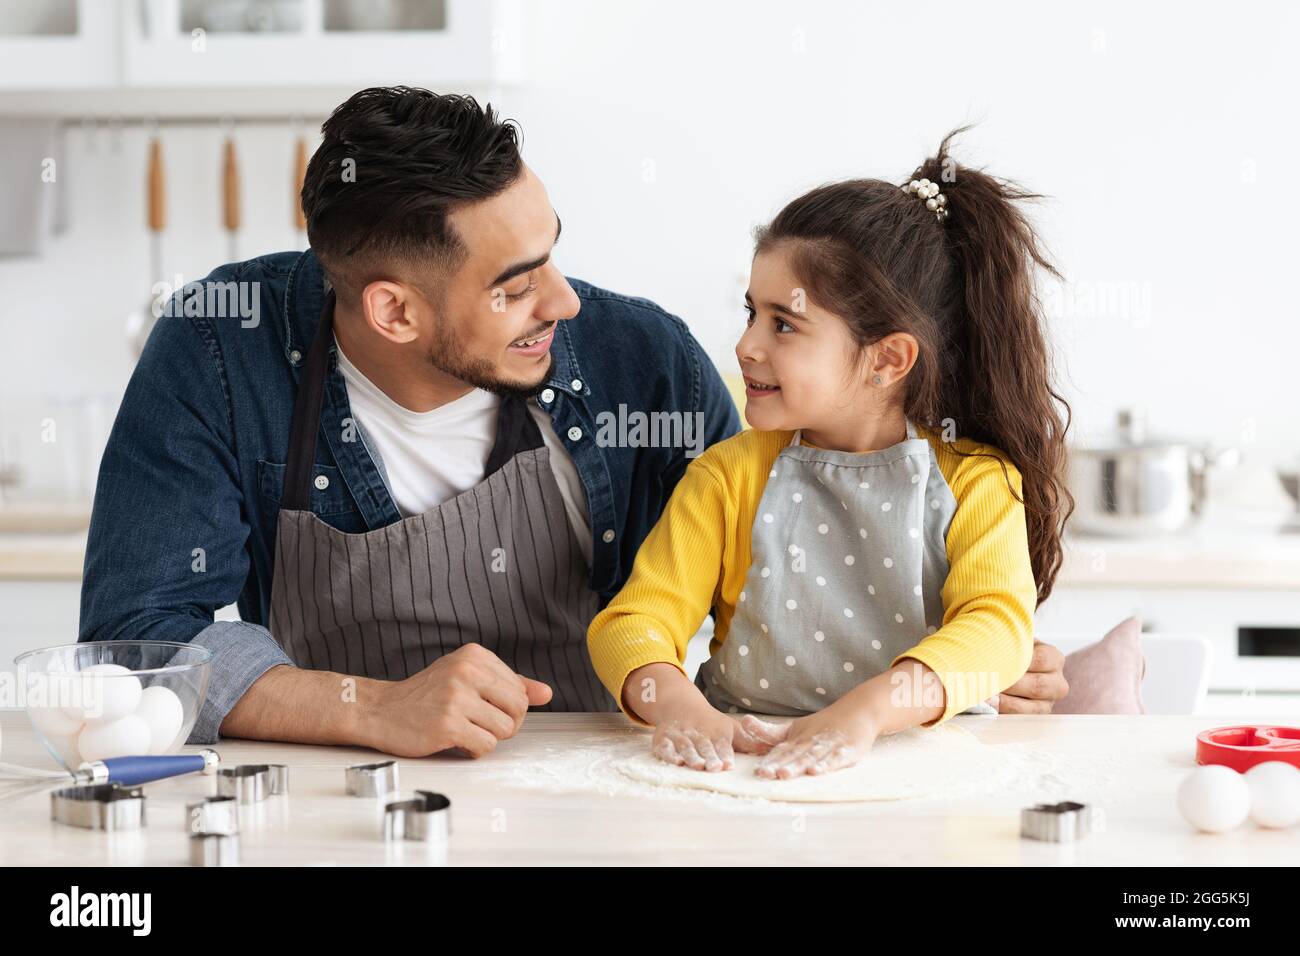 Cute Little Arab Girl Baking In Kitchen With Her Dad Stock Photo